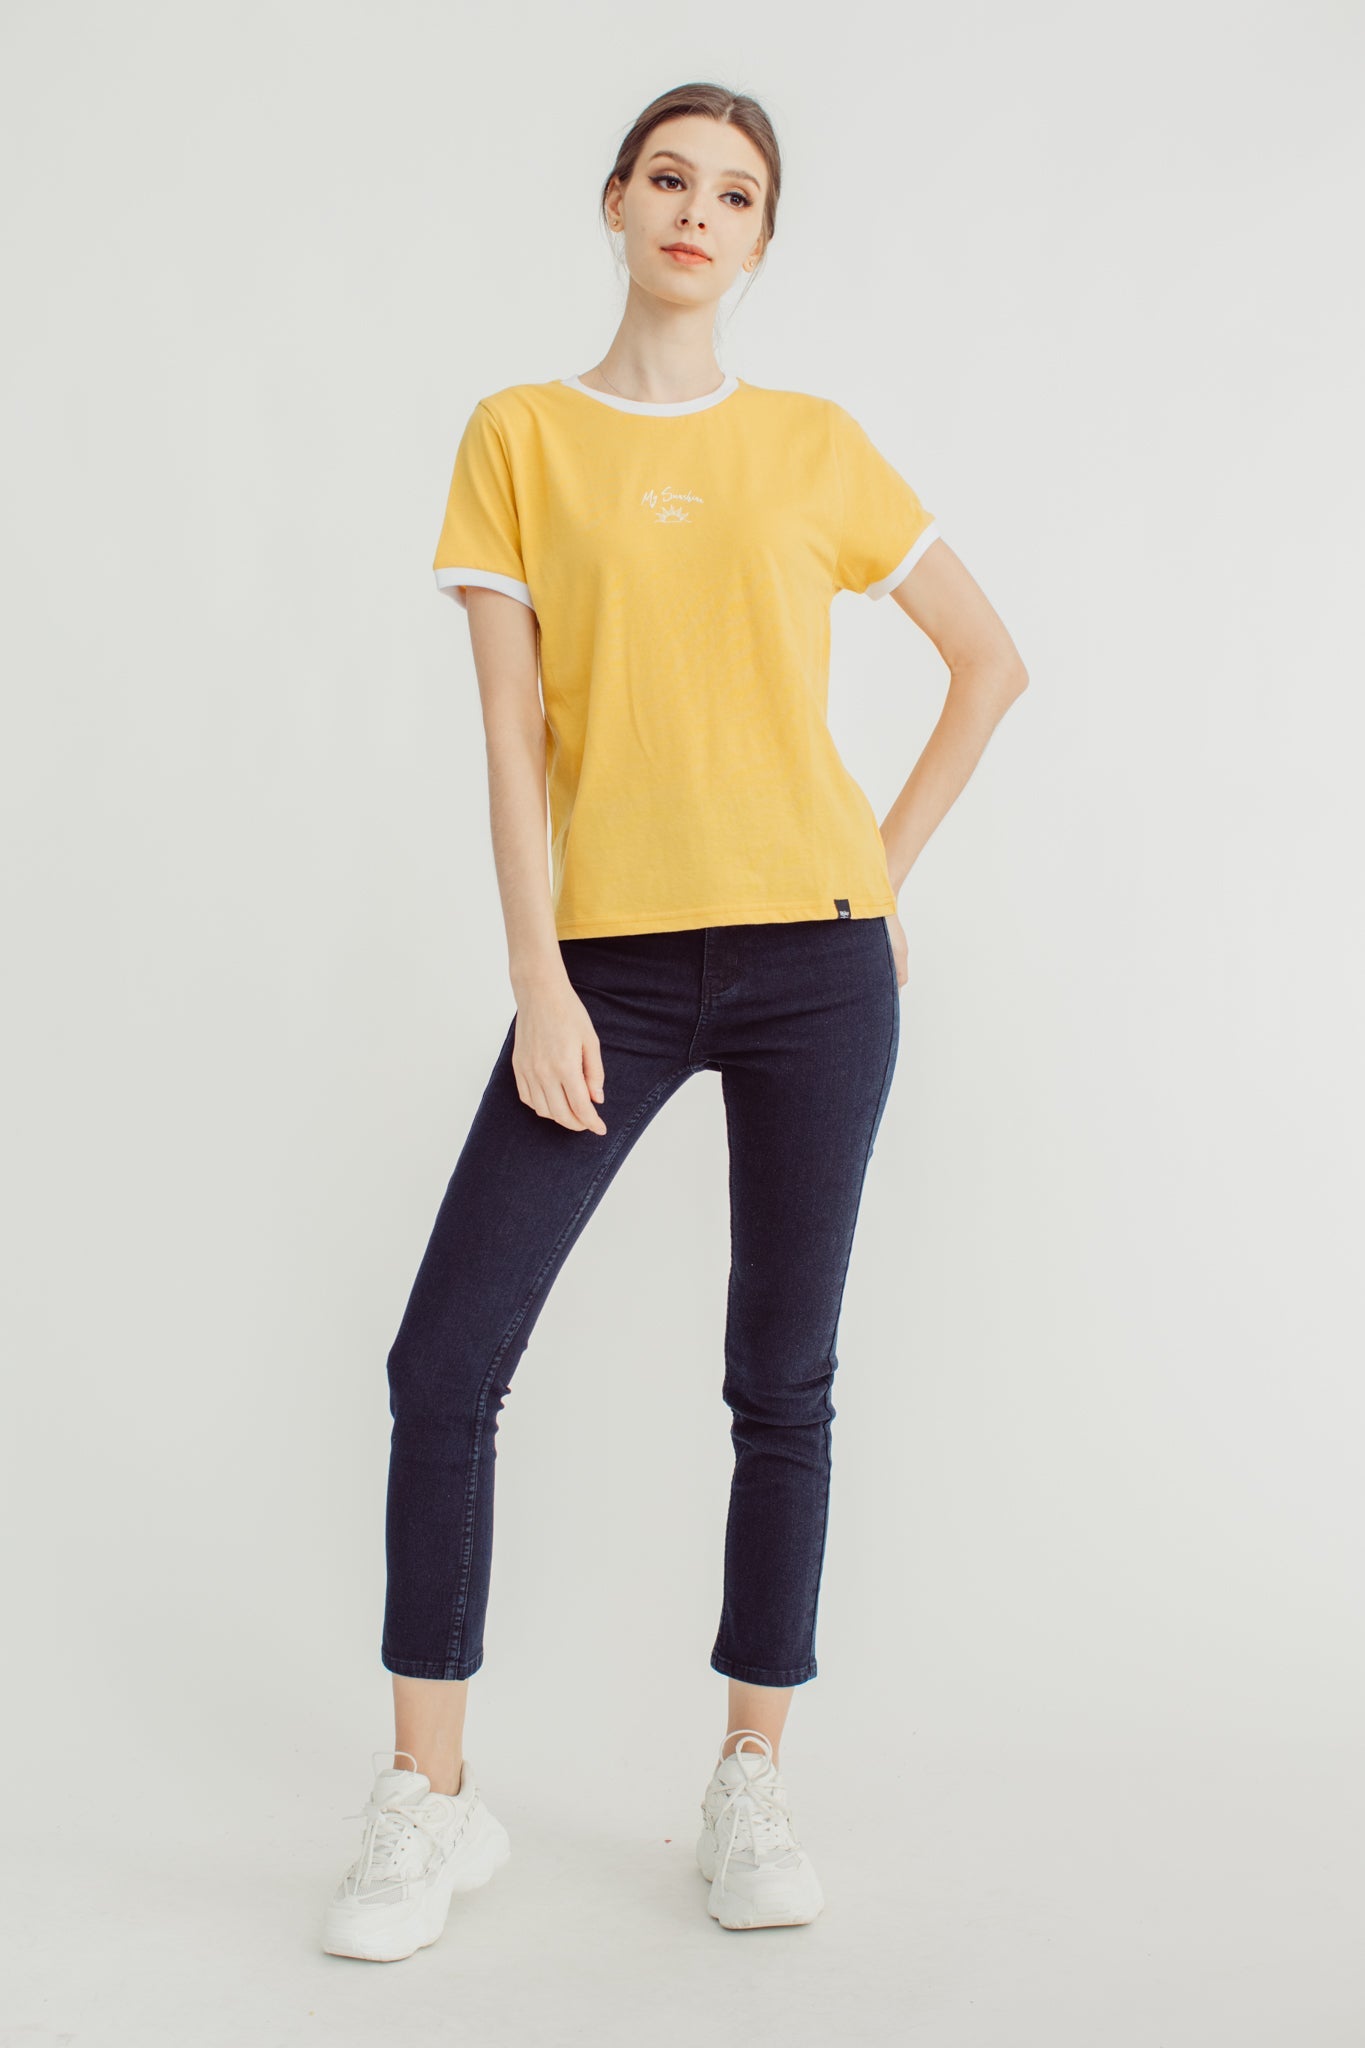 Ochre with My Sunshine Illustration on Ringer Classic Fit Tee - Mossimo PH